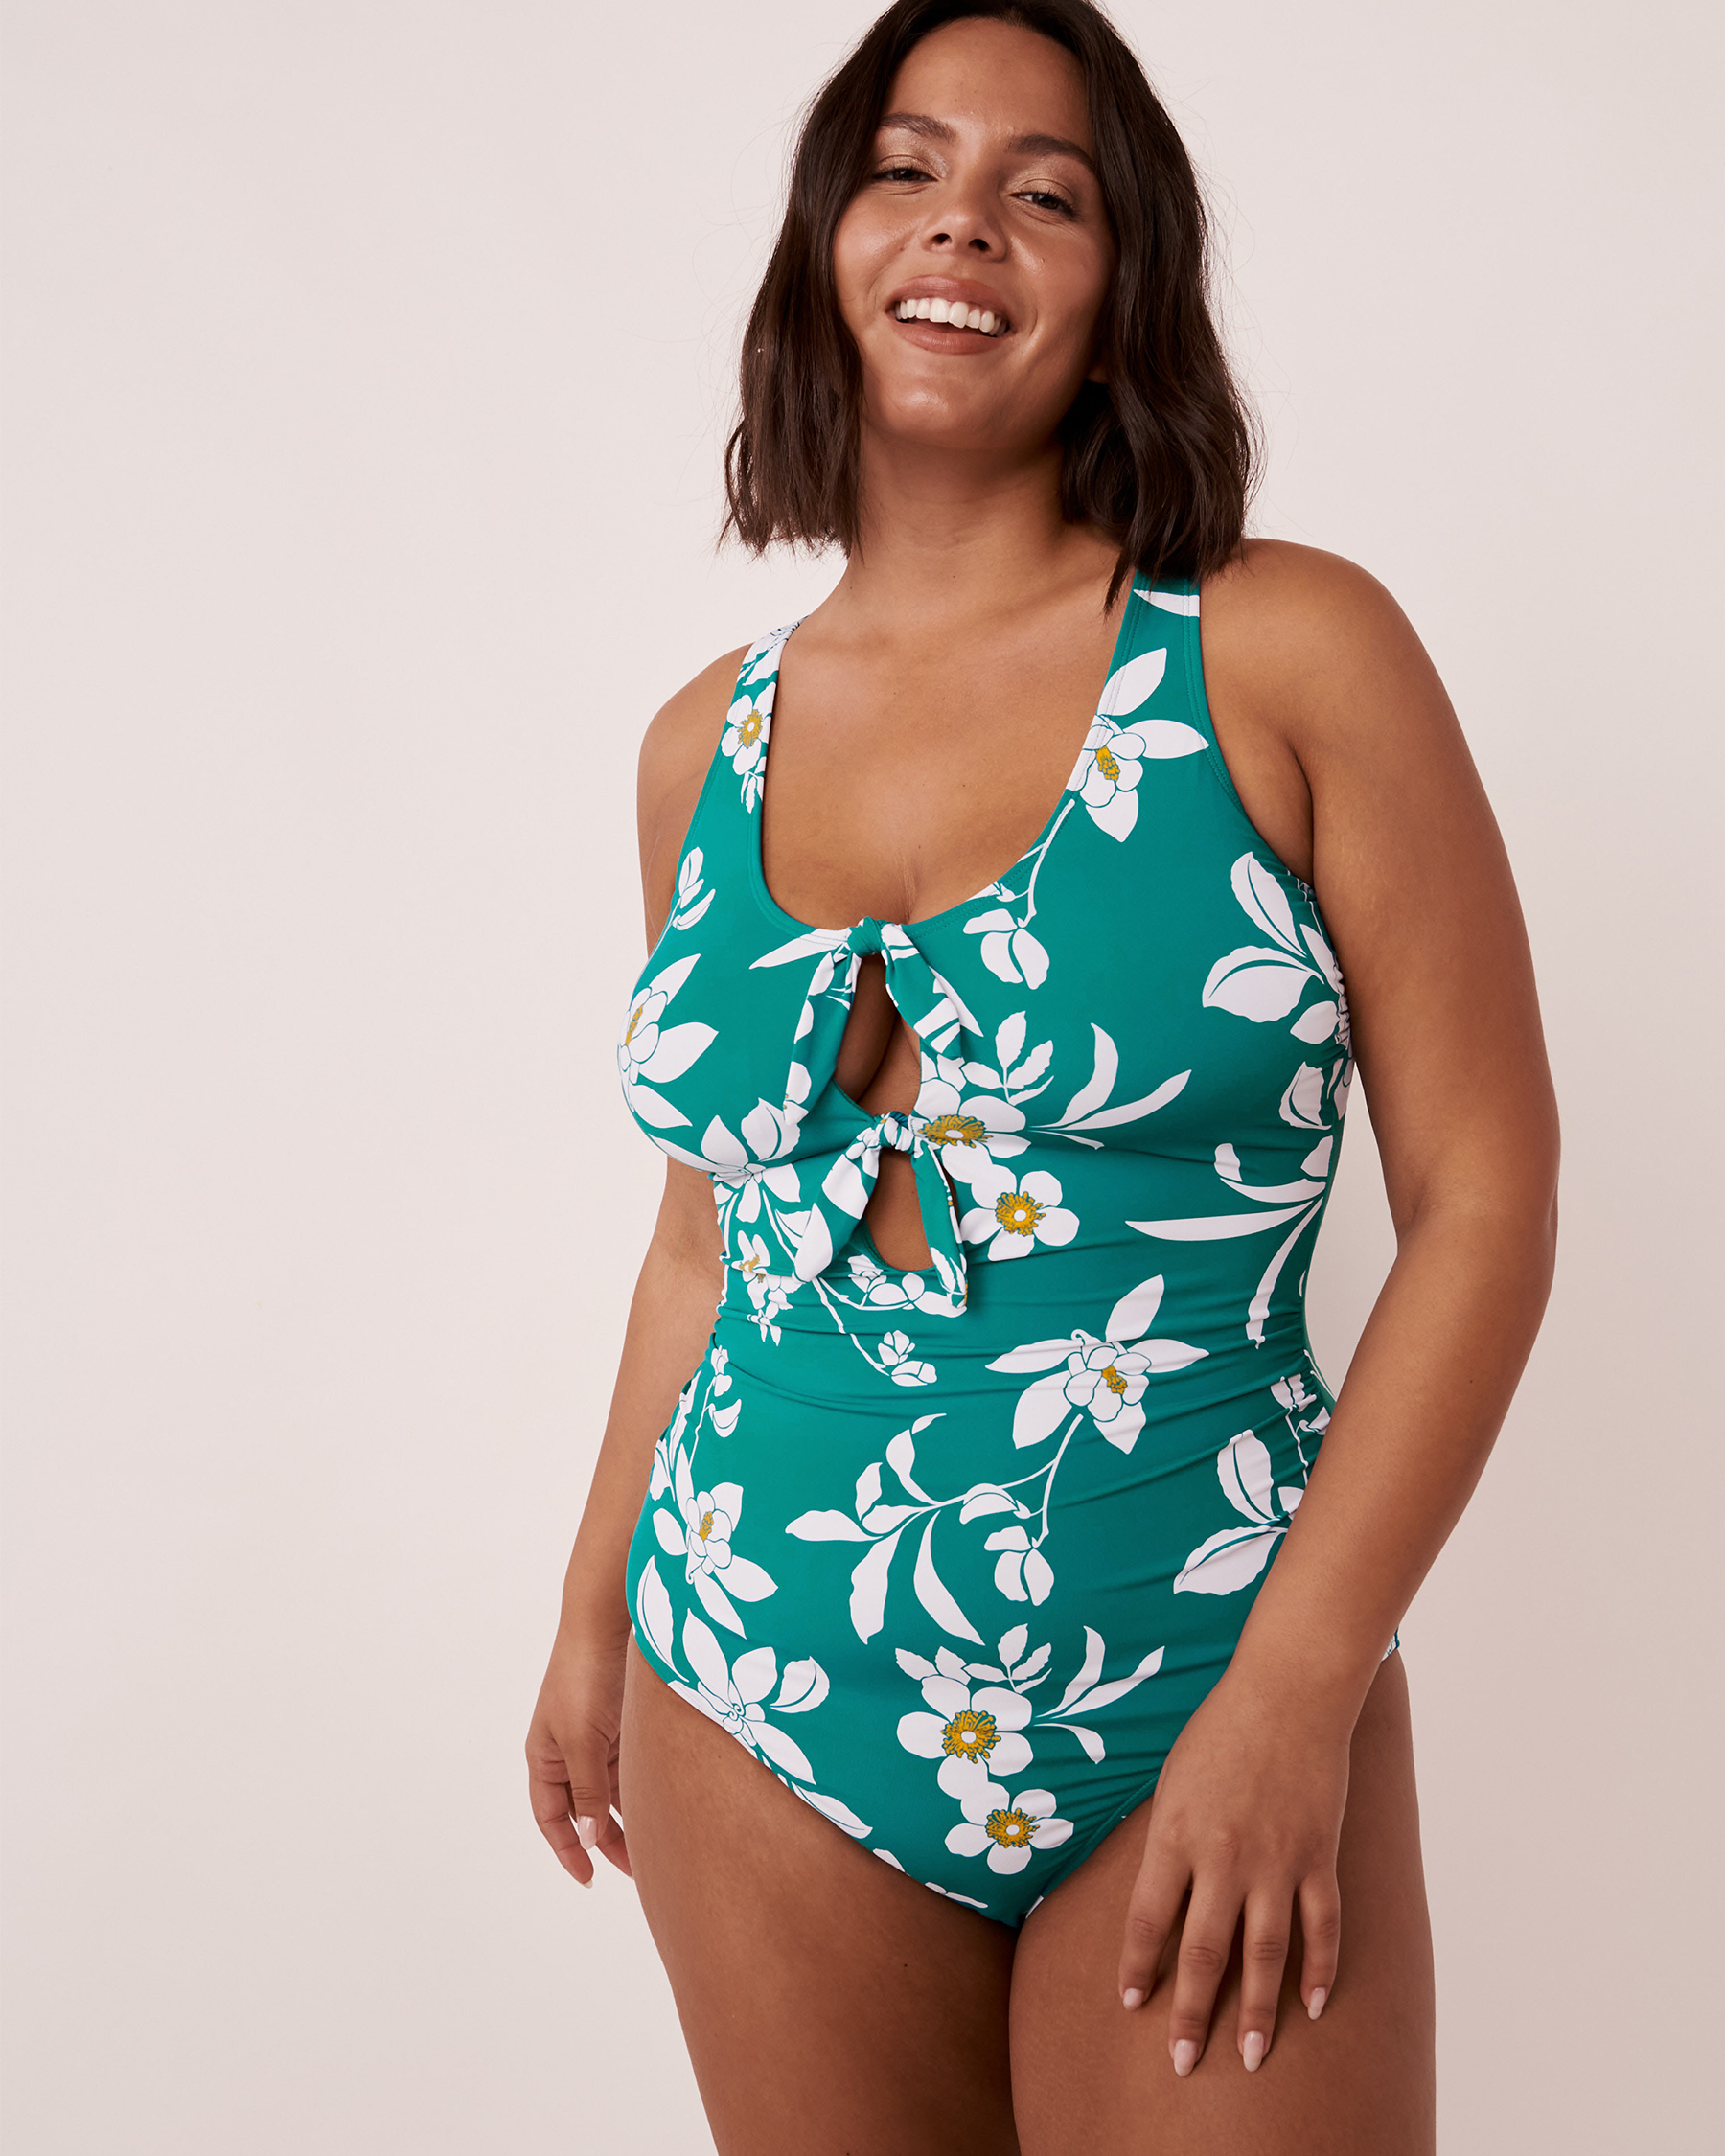 AQUAROSE HAWAII Knotted One-piece Swimsuit Blue floral 70400053 - View4